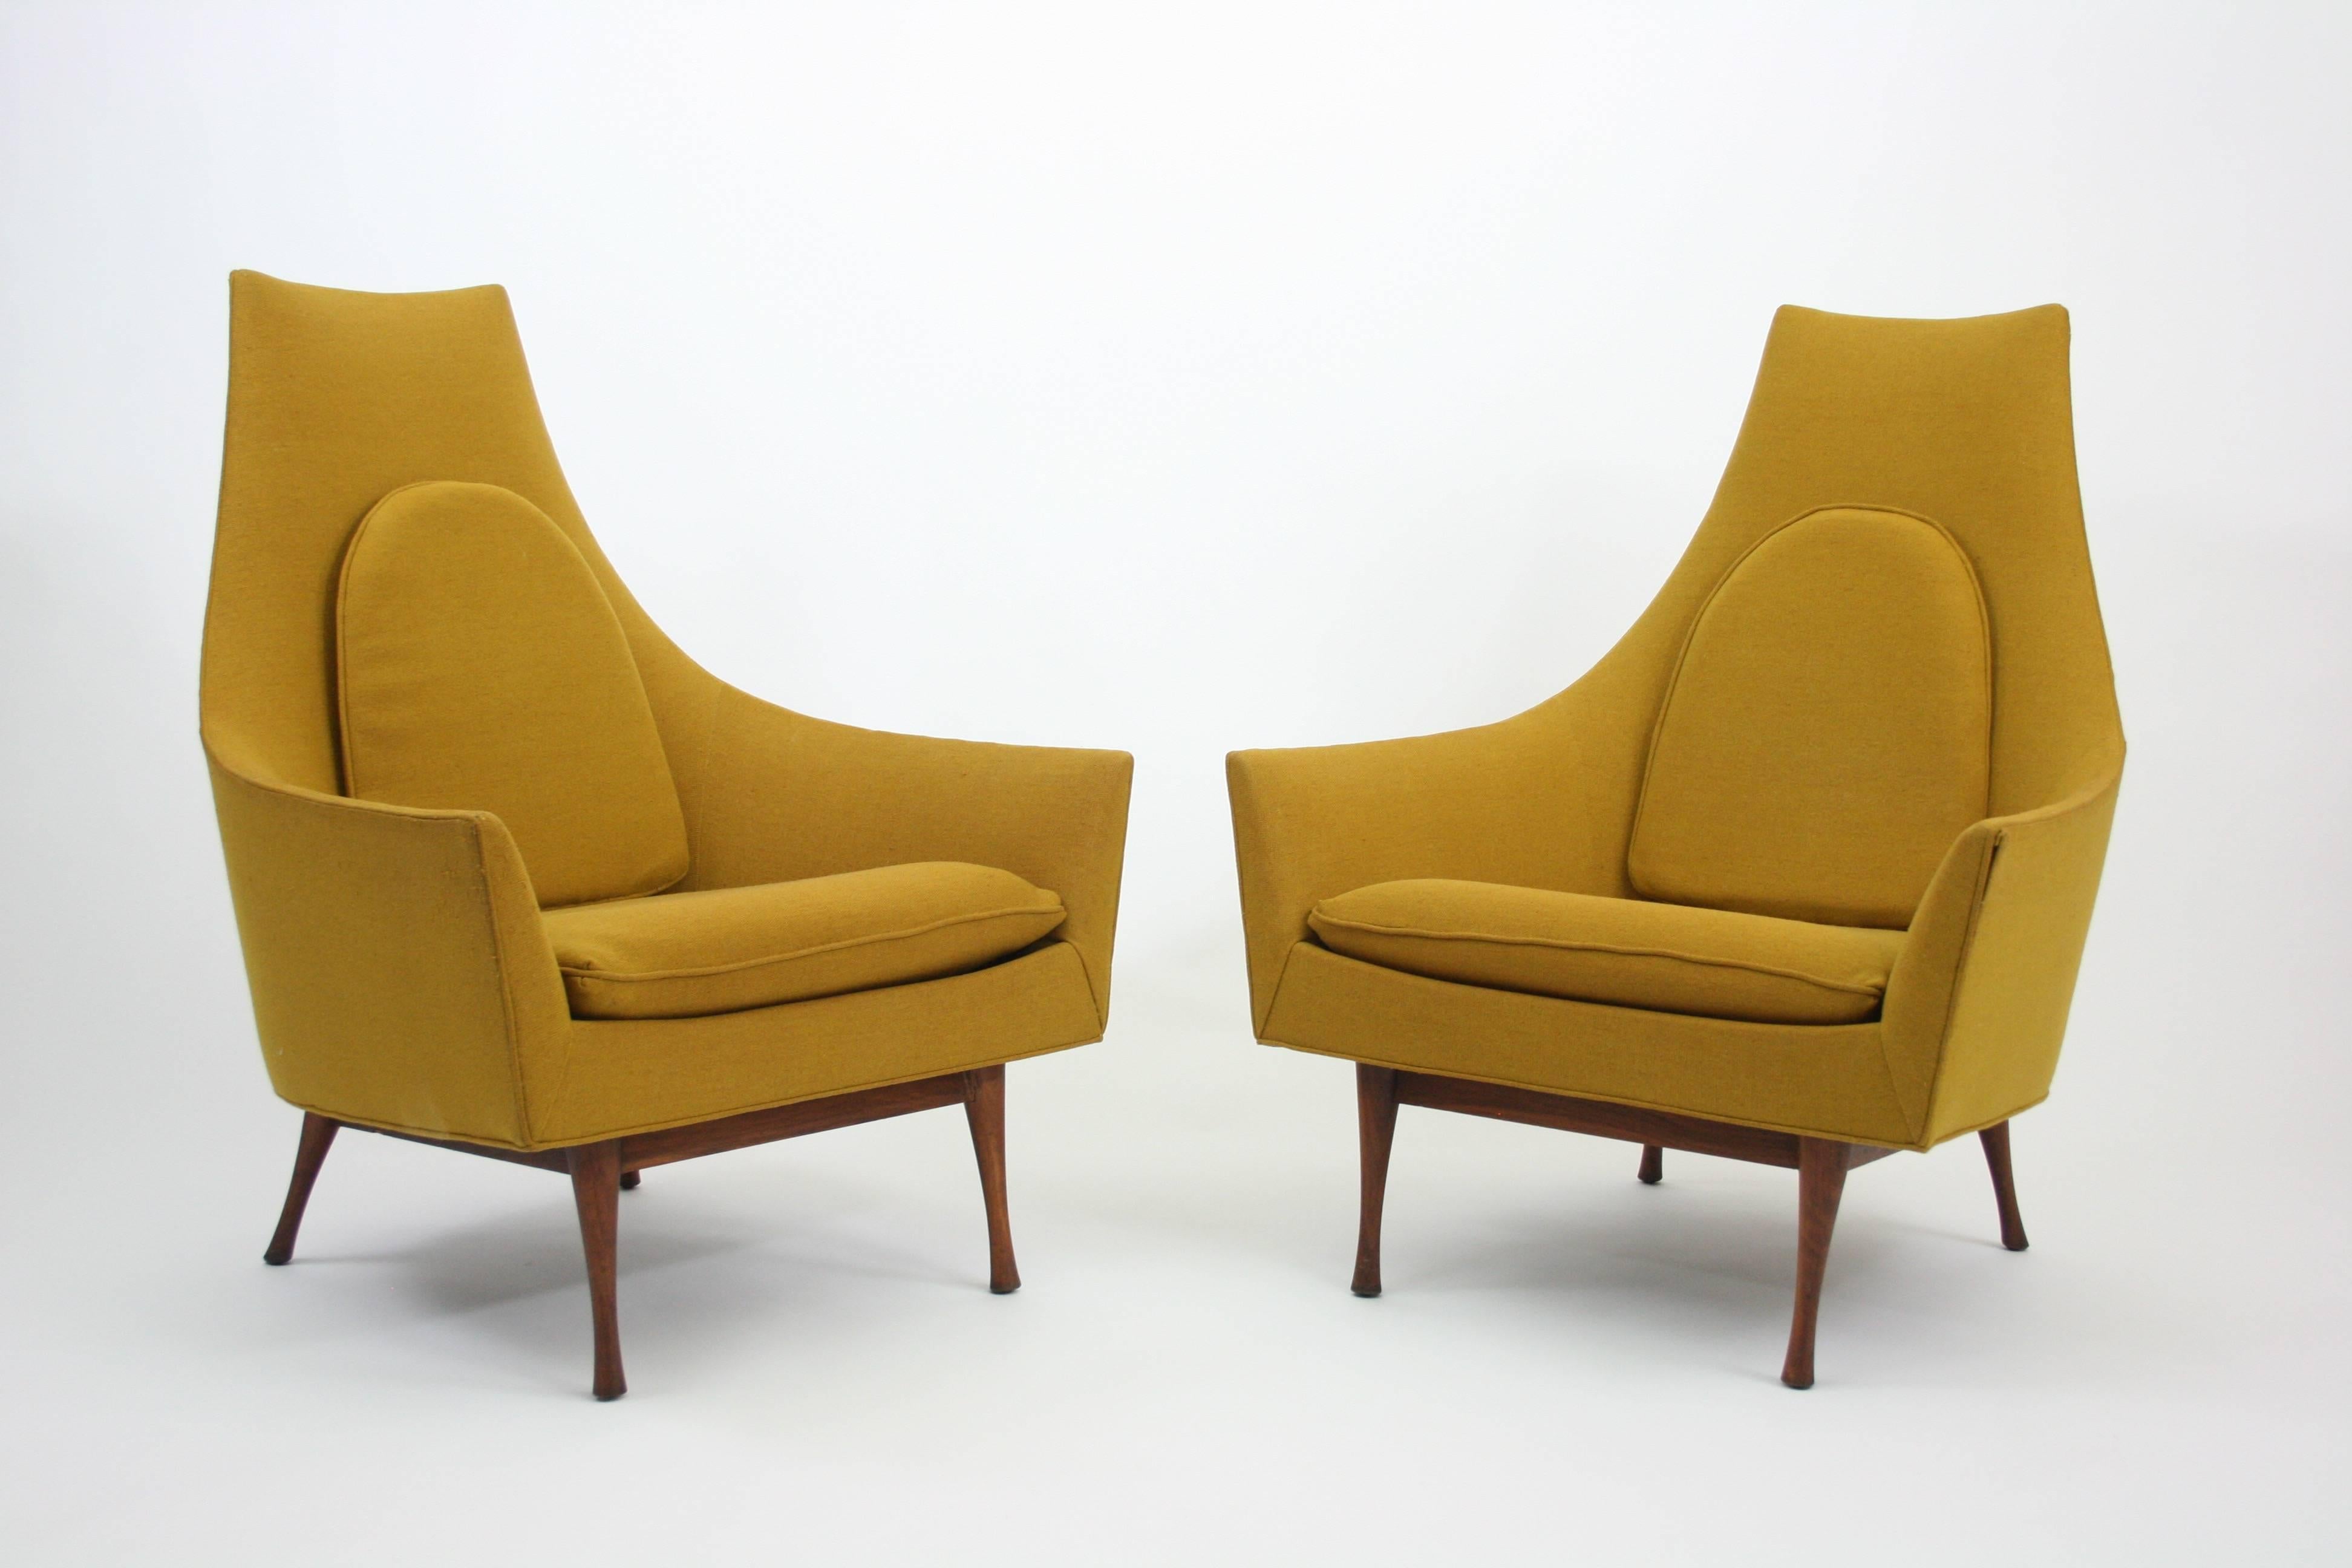 Walnut Rare Pair of Lounge Chairs by Paul McCobb for Widdicomb